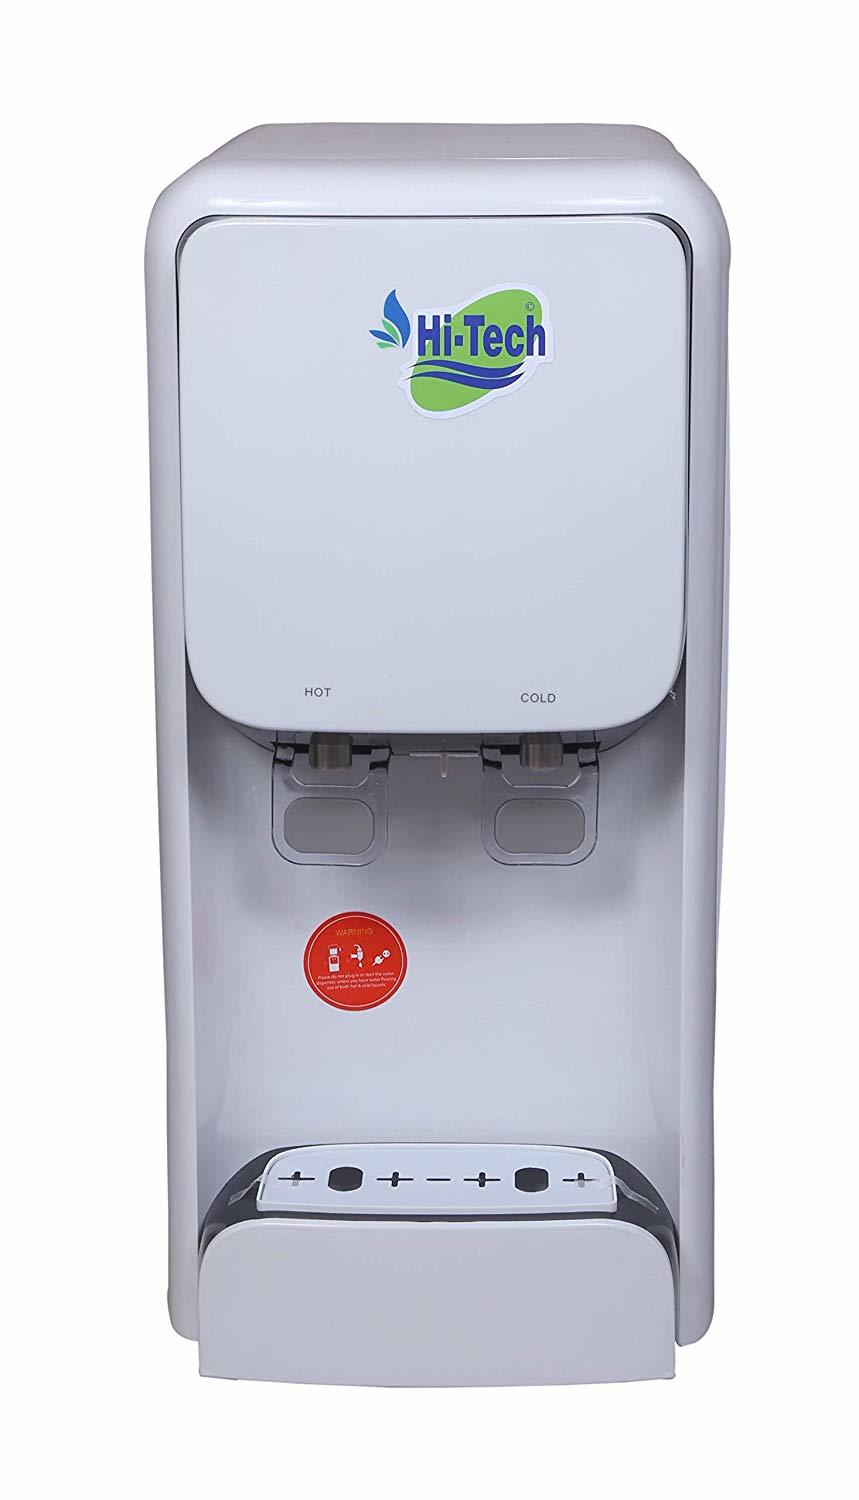 Fusion CT RO Hot  And Cold Water Purifier